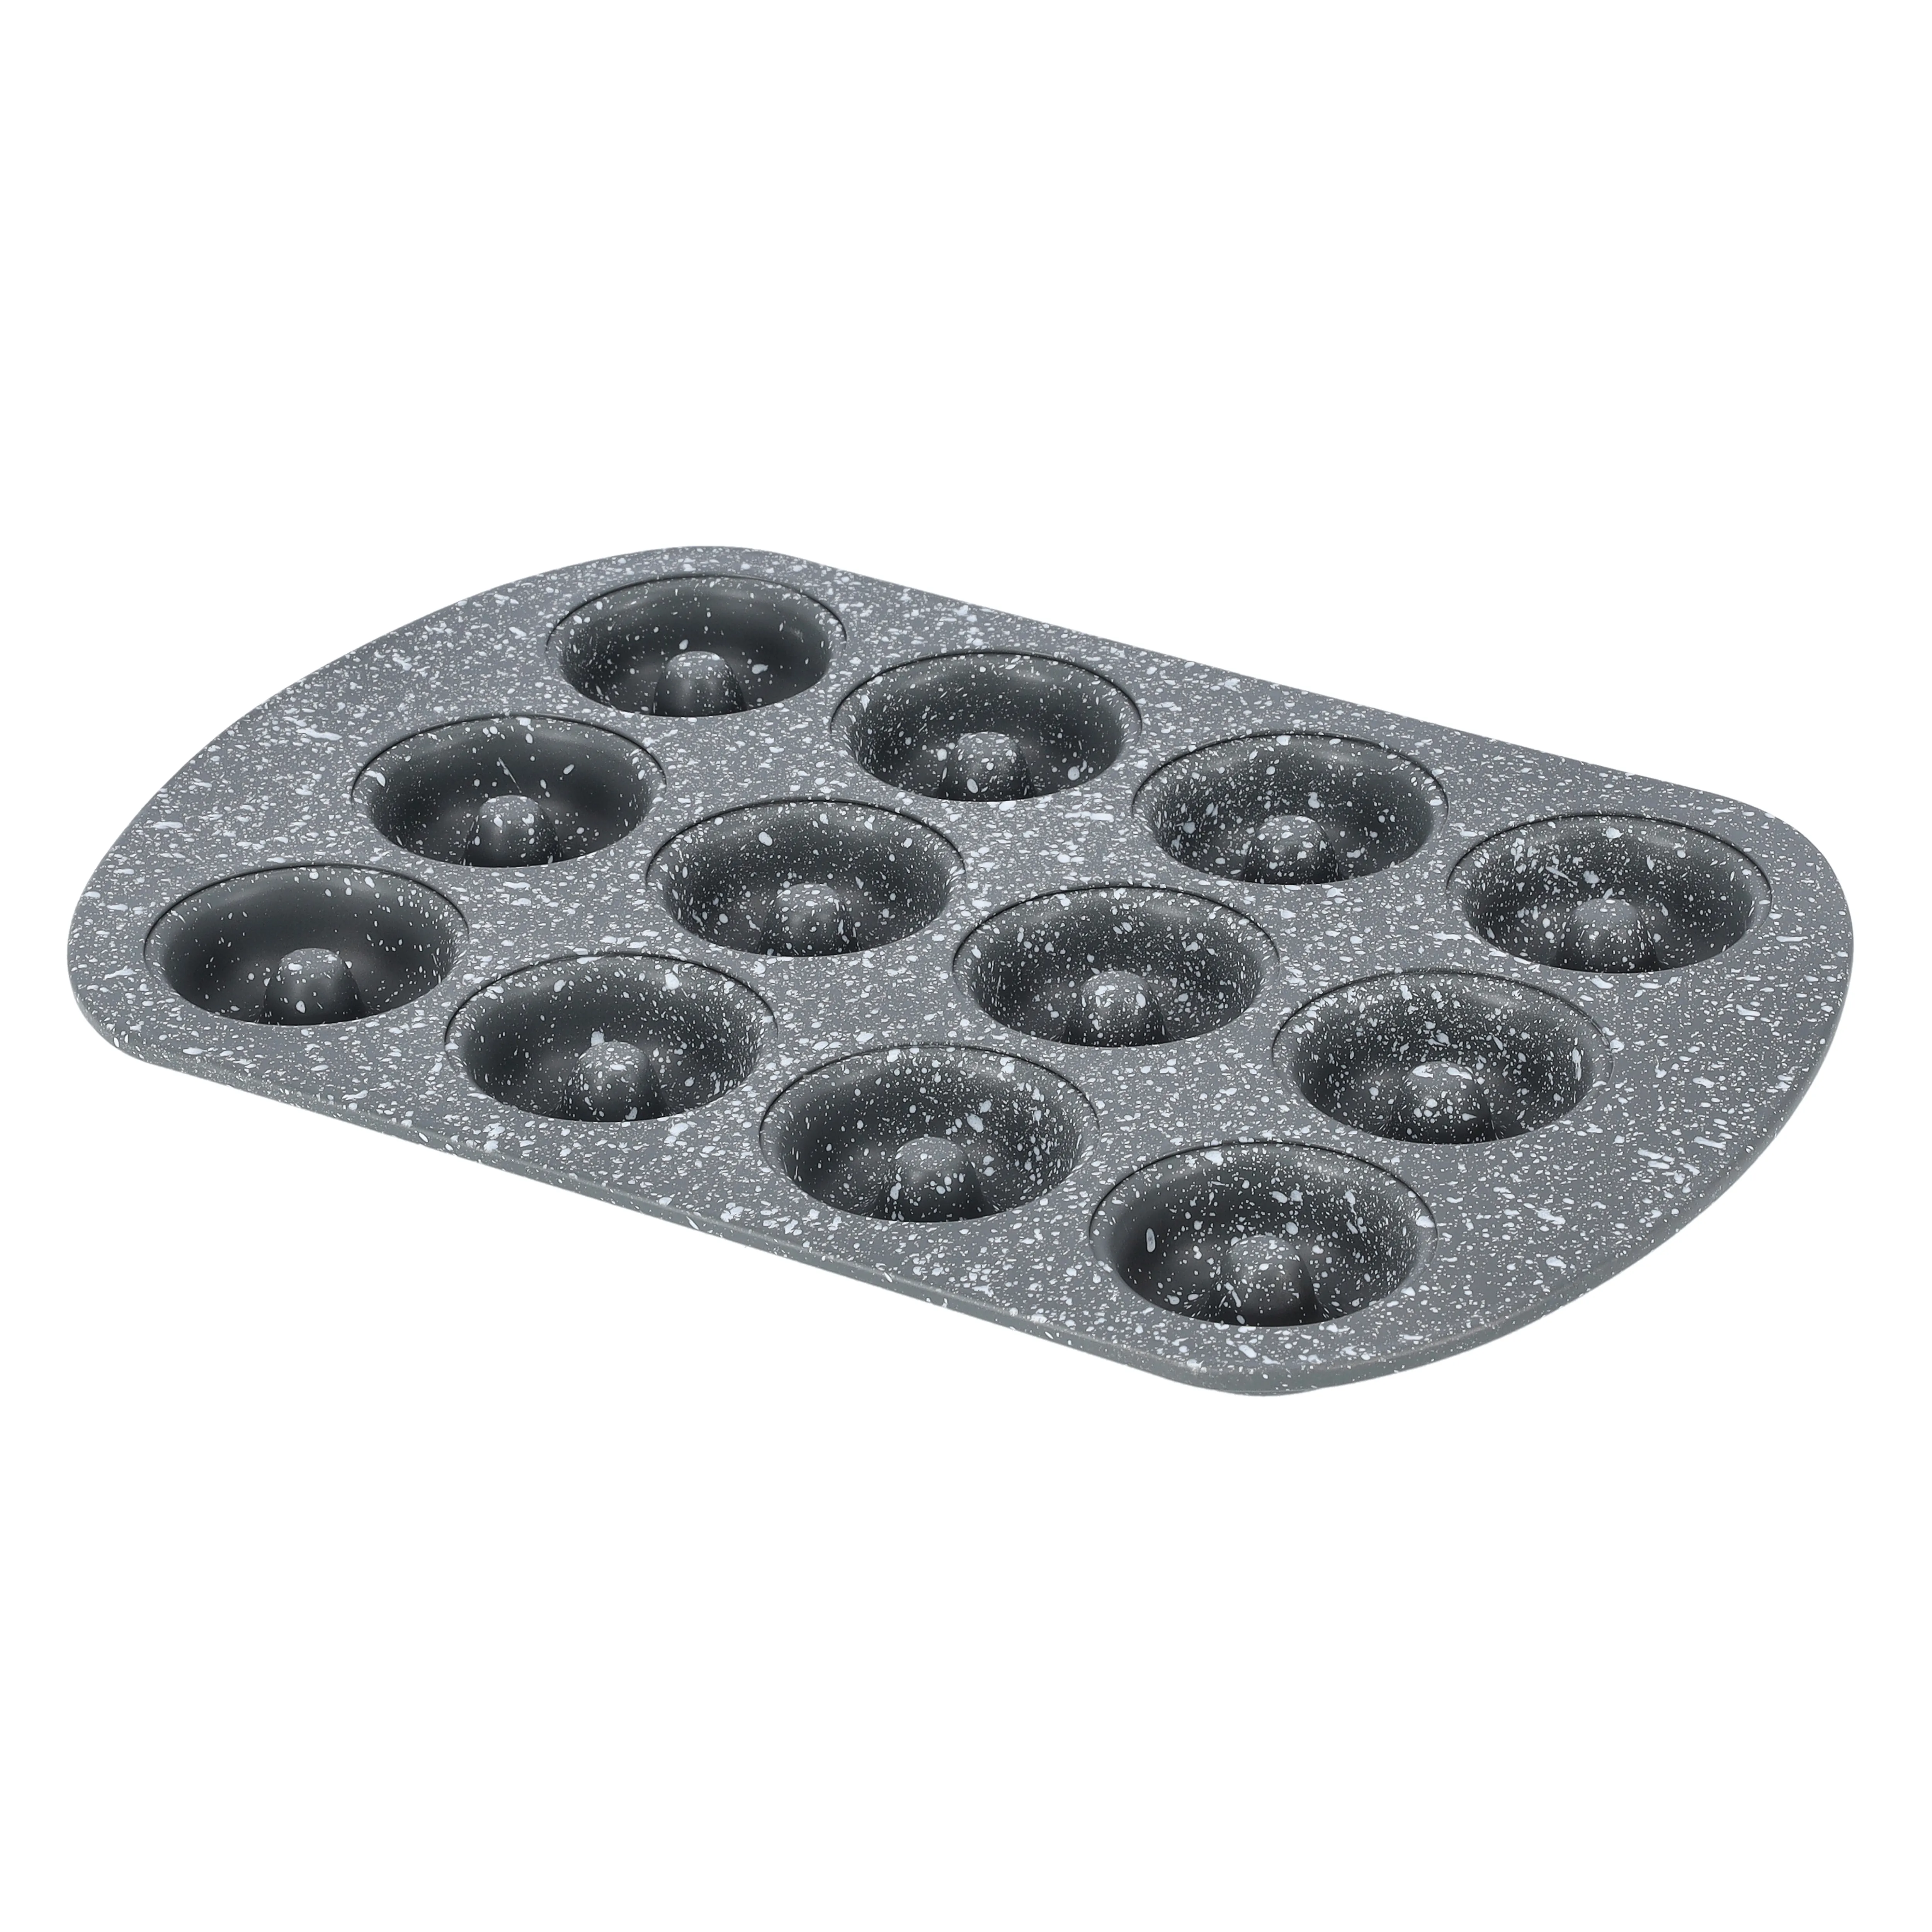 Royalford  Mini Donut Pan - Non Stick Granite Coating Baking with 12 Slots Reusable Bagel Mold Tray for Prolonged Use Oven Safe Baking Molds for Small Donuts, Cookie, Resin Art, & More